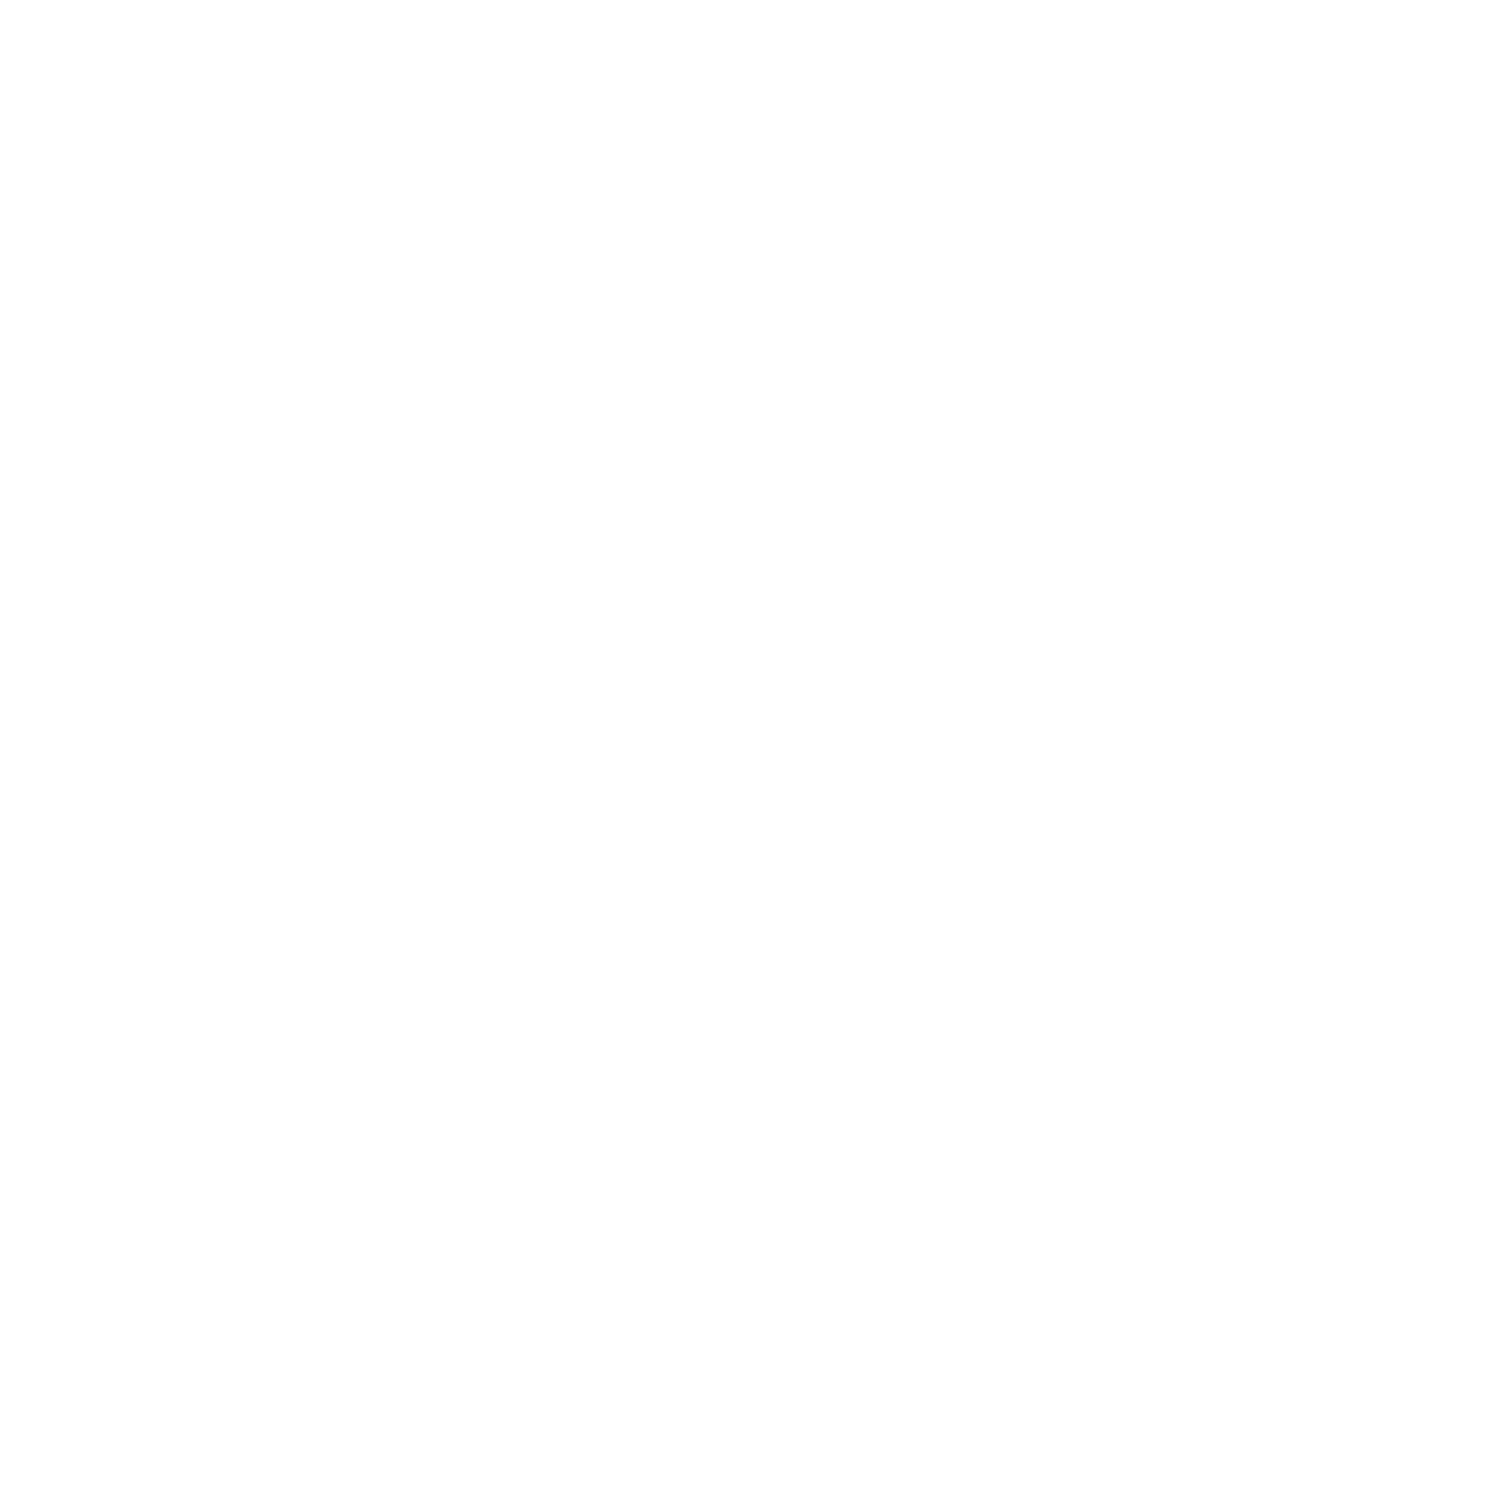 Colombo Business Consulting